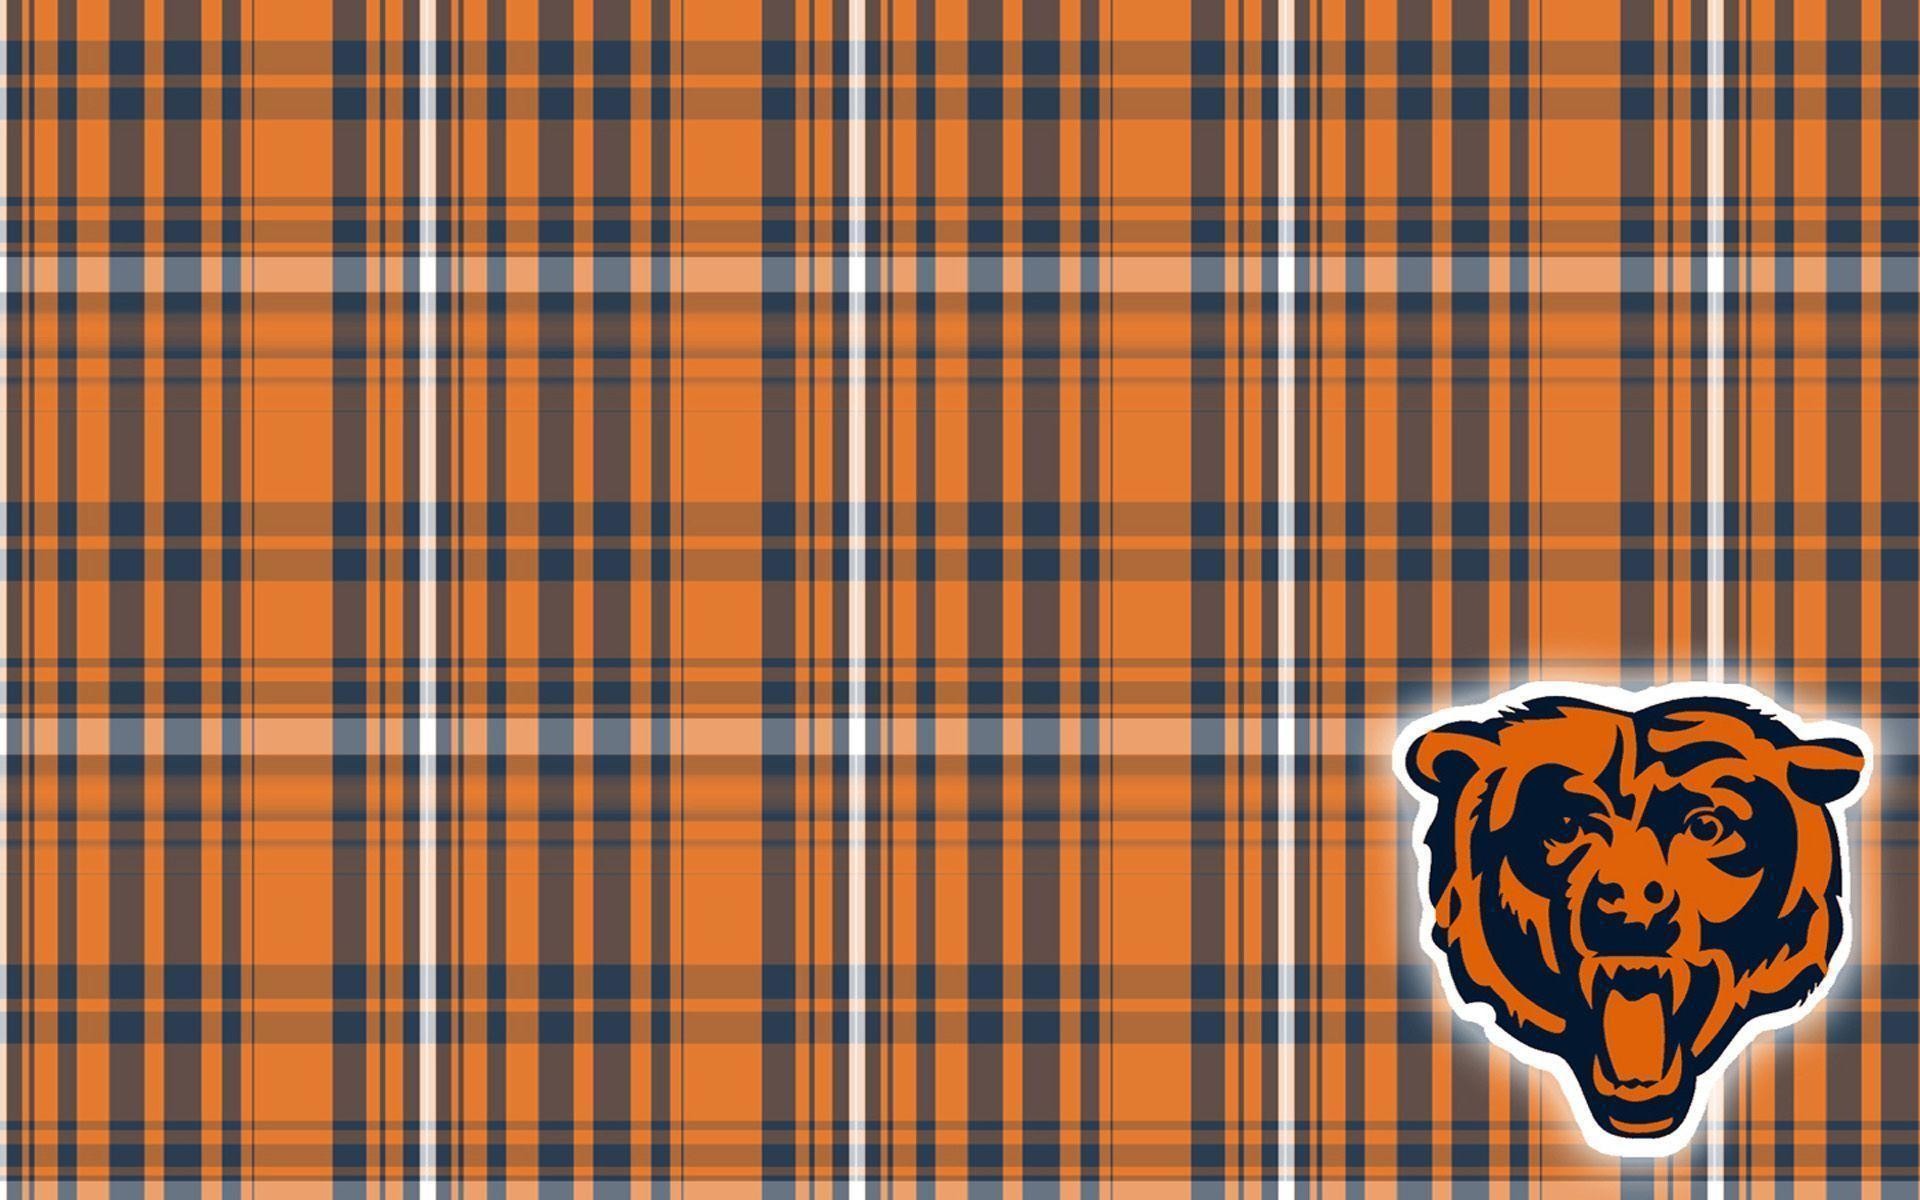 1920x1200 Enjoy this Chicago Bears background | Chicago Bears wallpapers